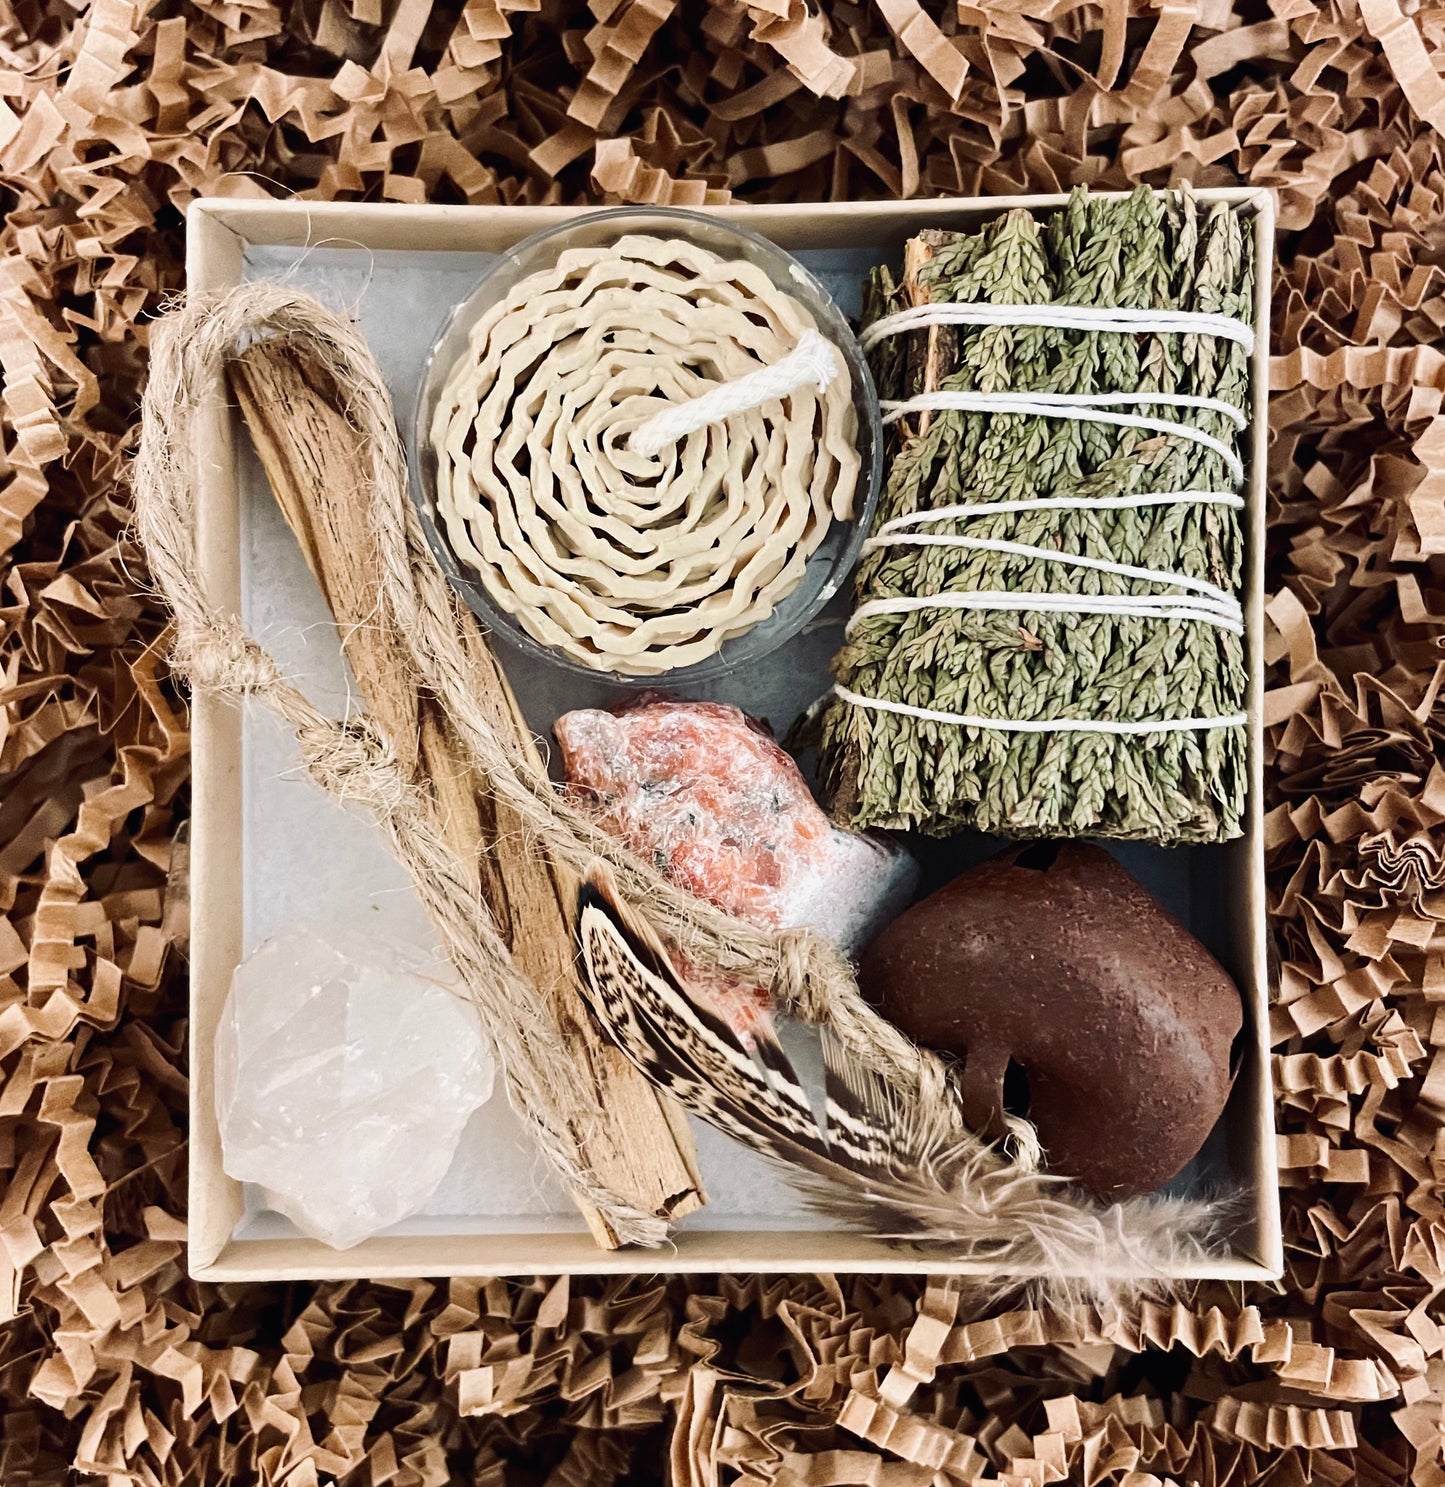 Cleaning Powers (Cleansing) Spell Kit